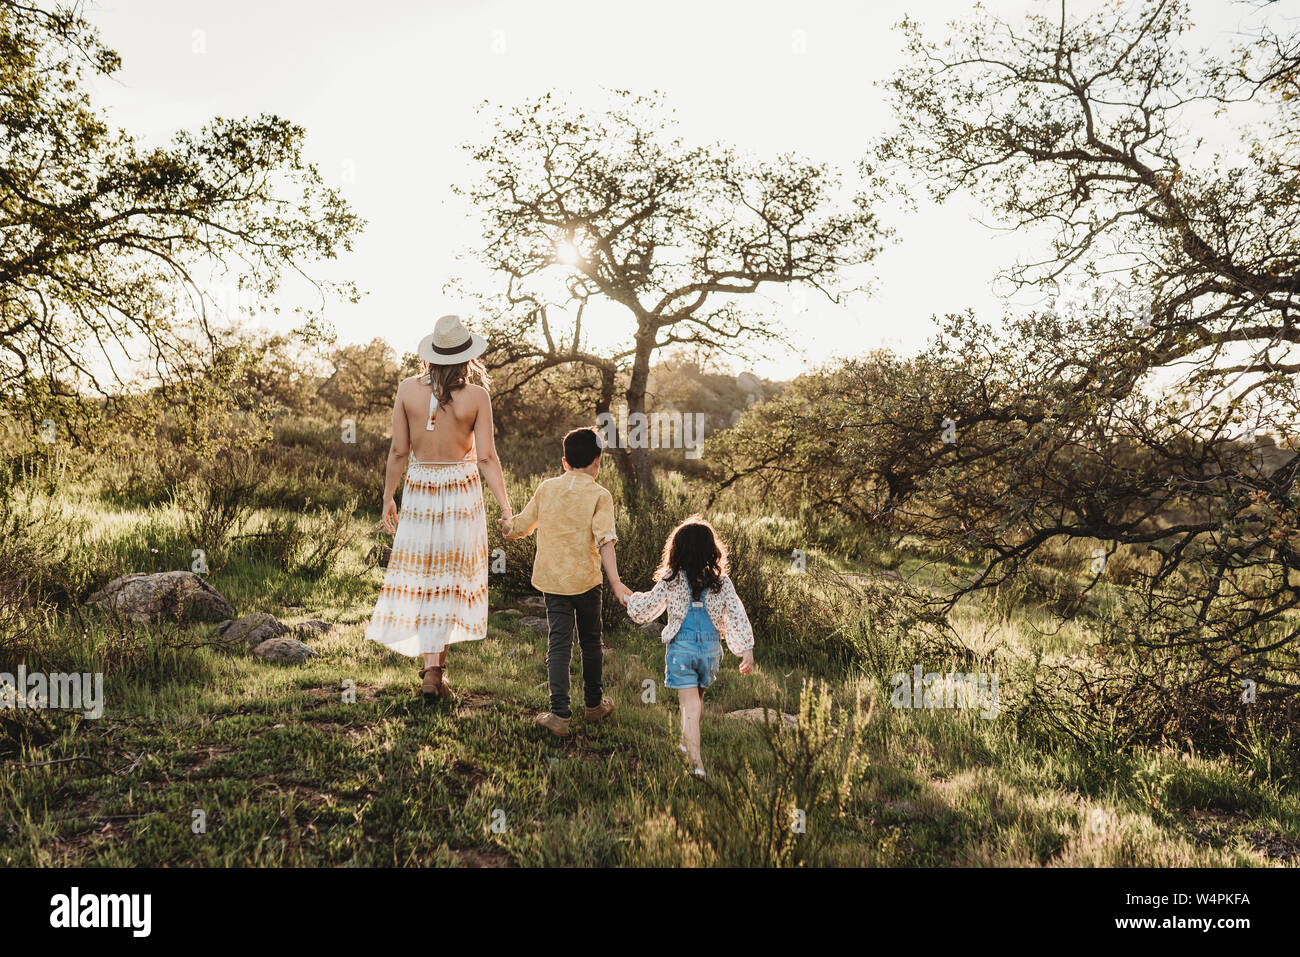 Back view of mother and children walking away in field Stock Photo